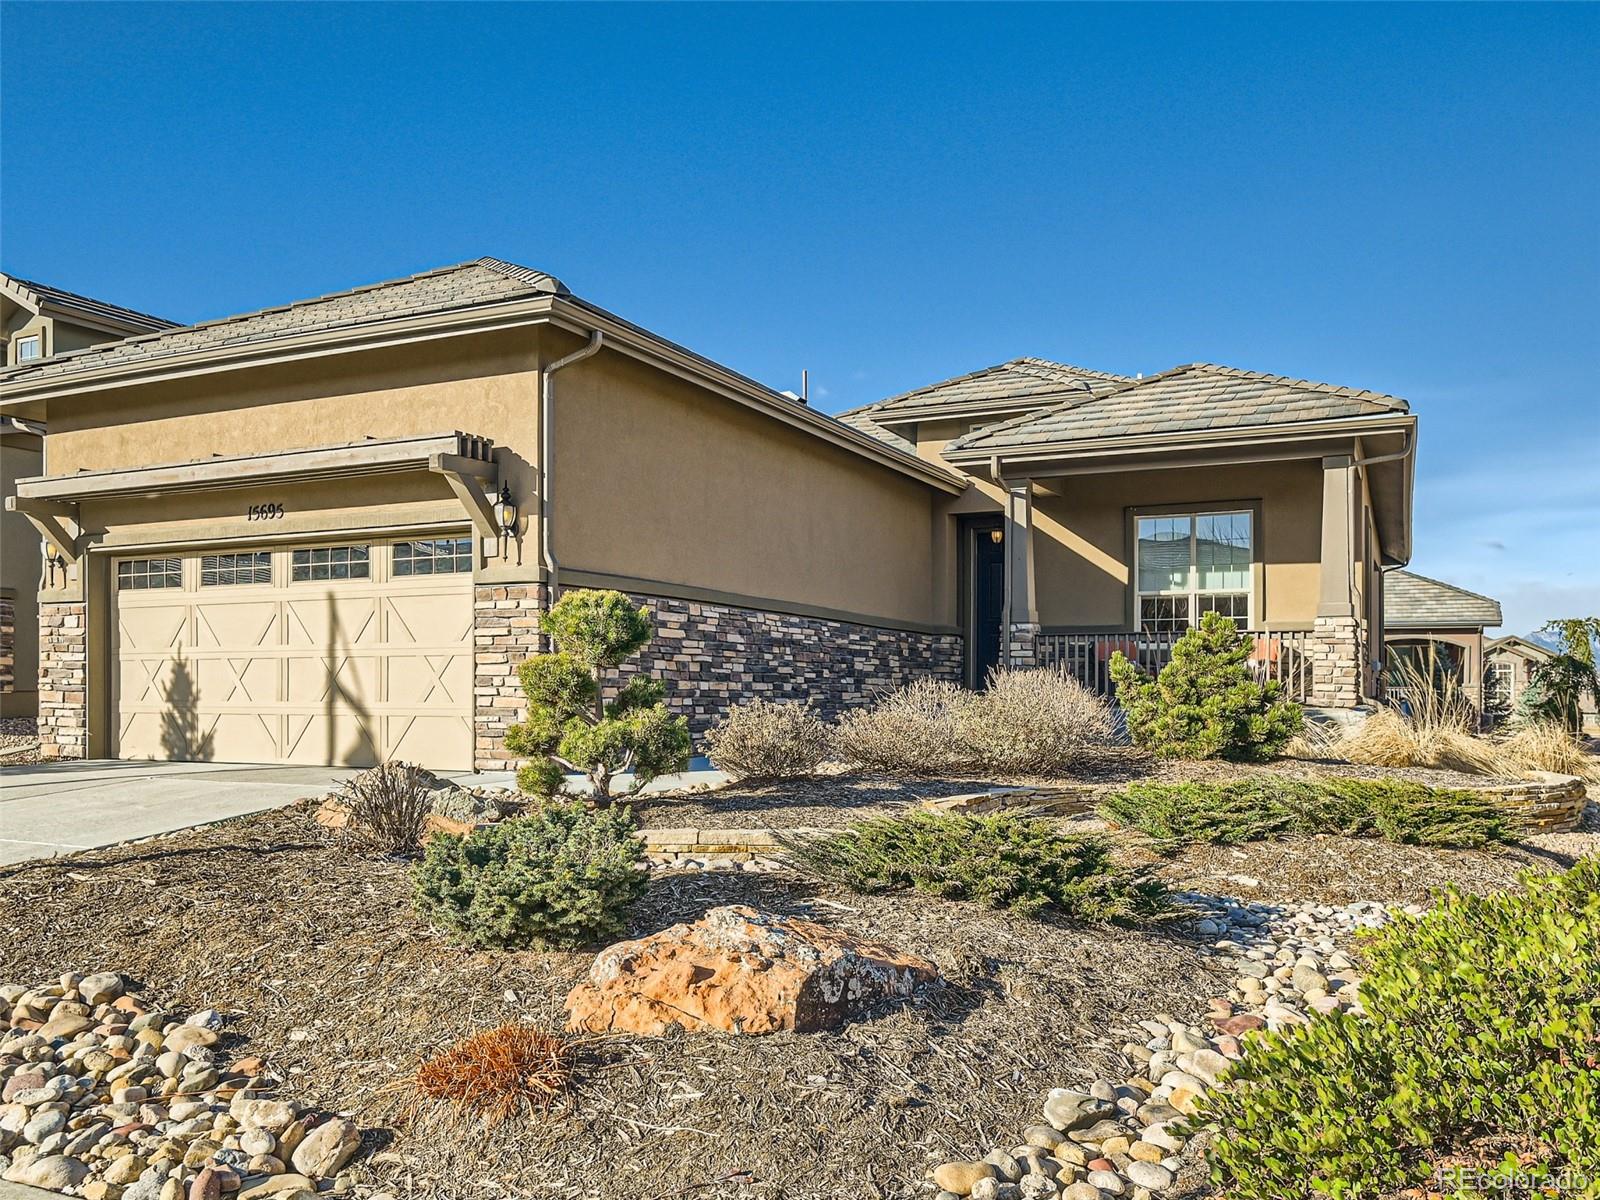 15695  puma run, Broomfield sold home. Closed on 2024-04-12 for $749,000.